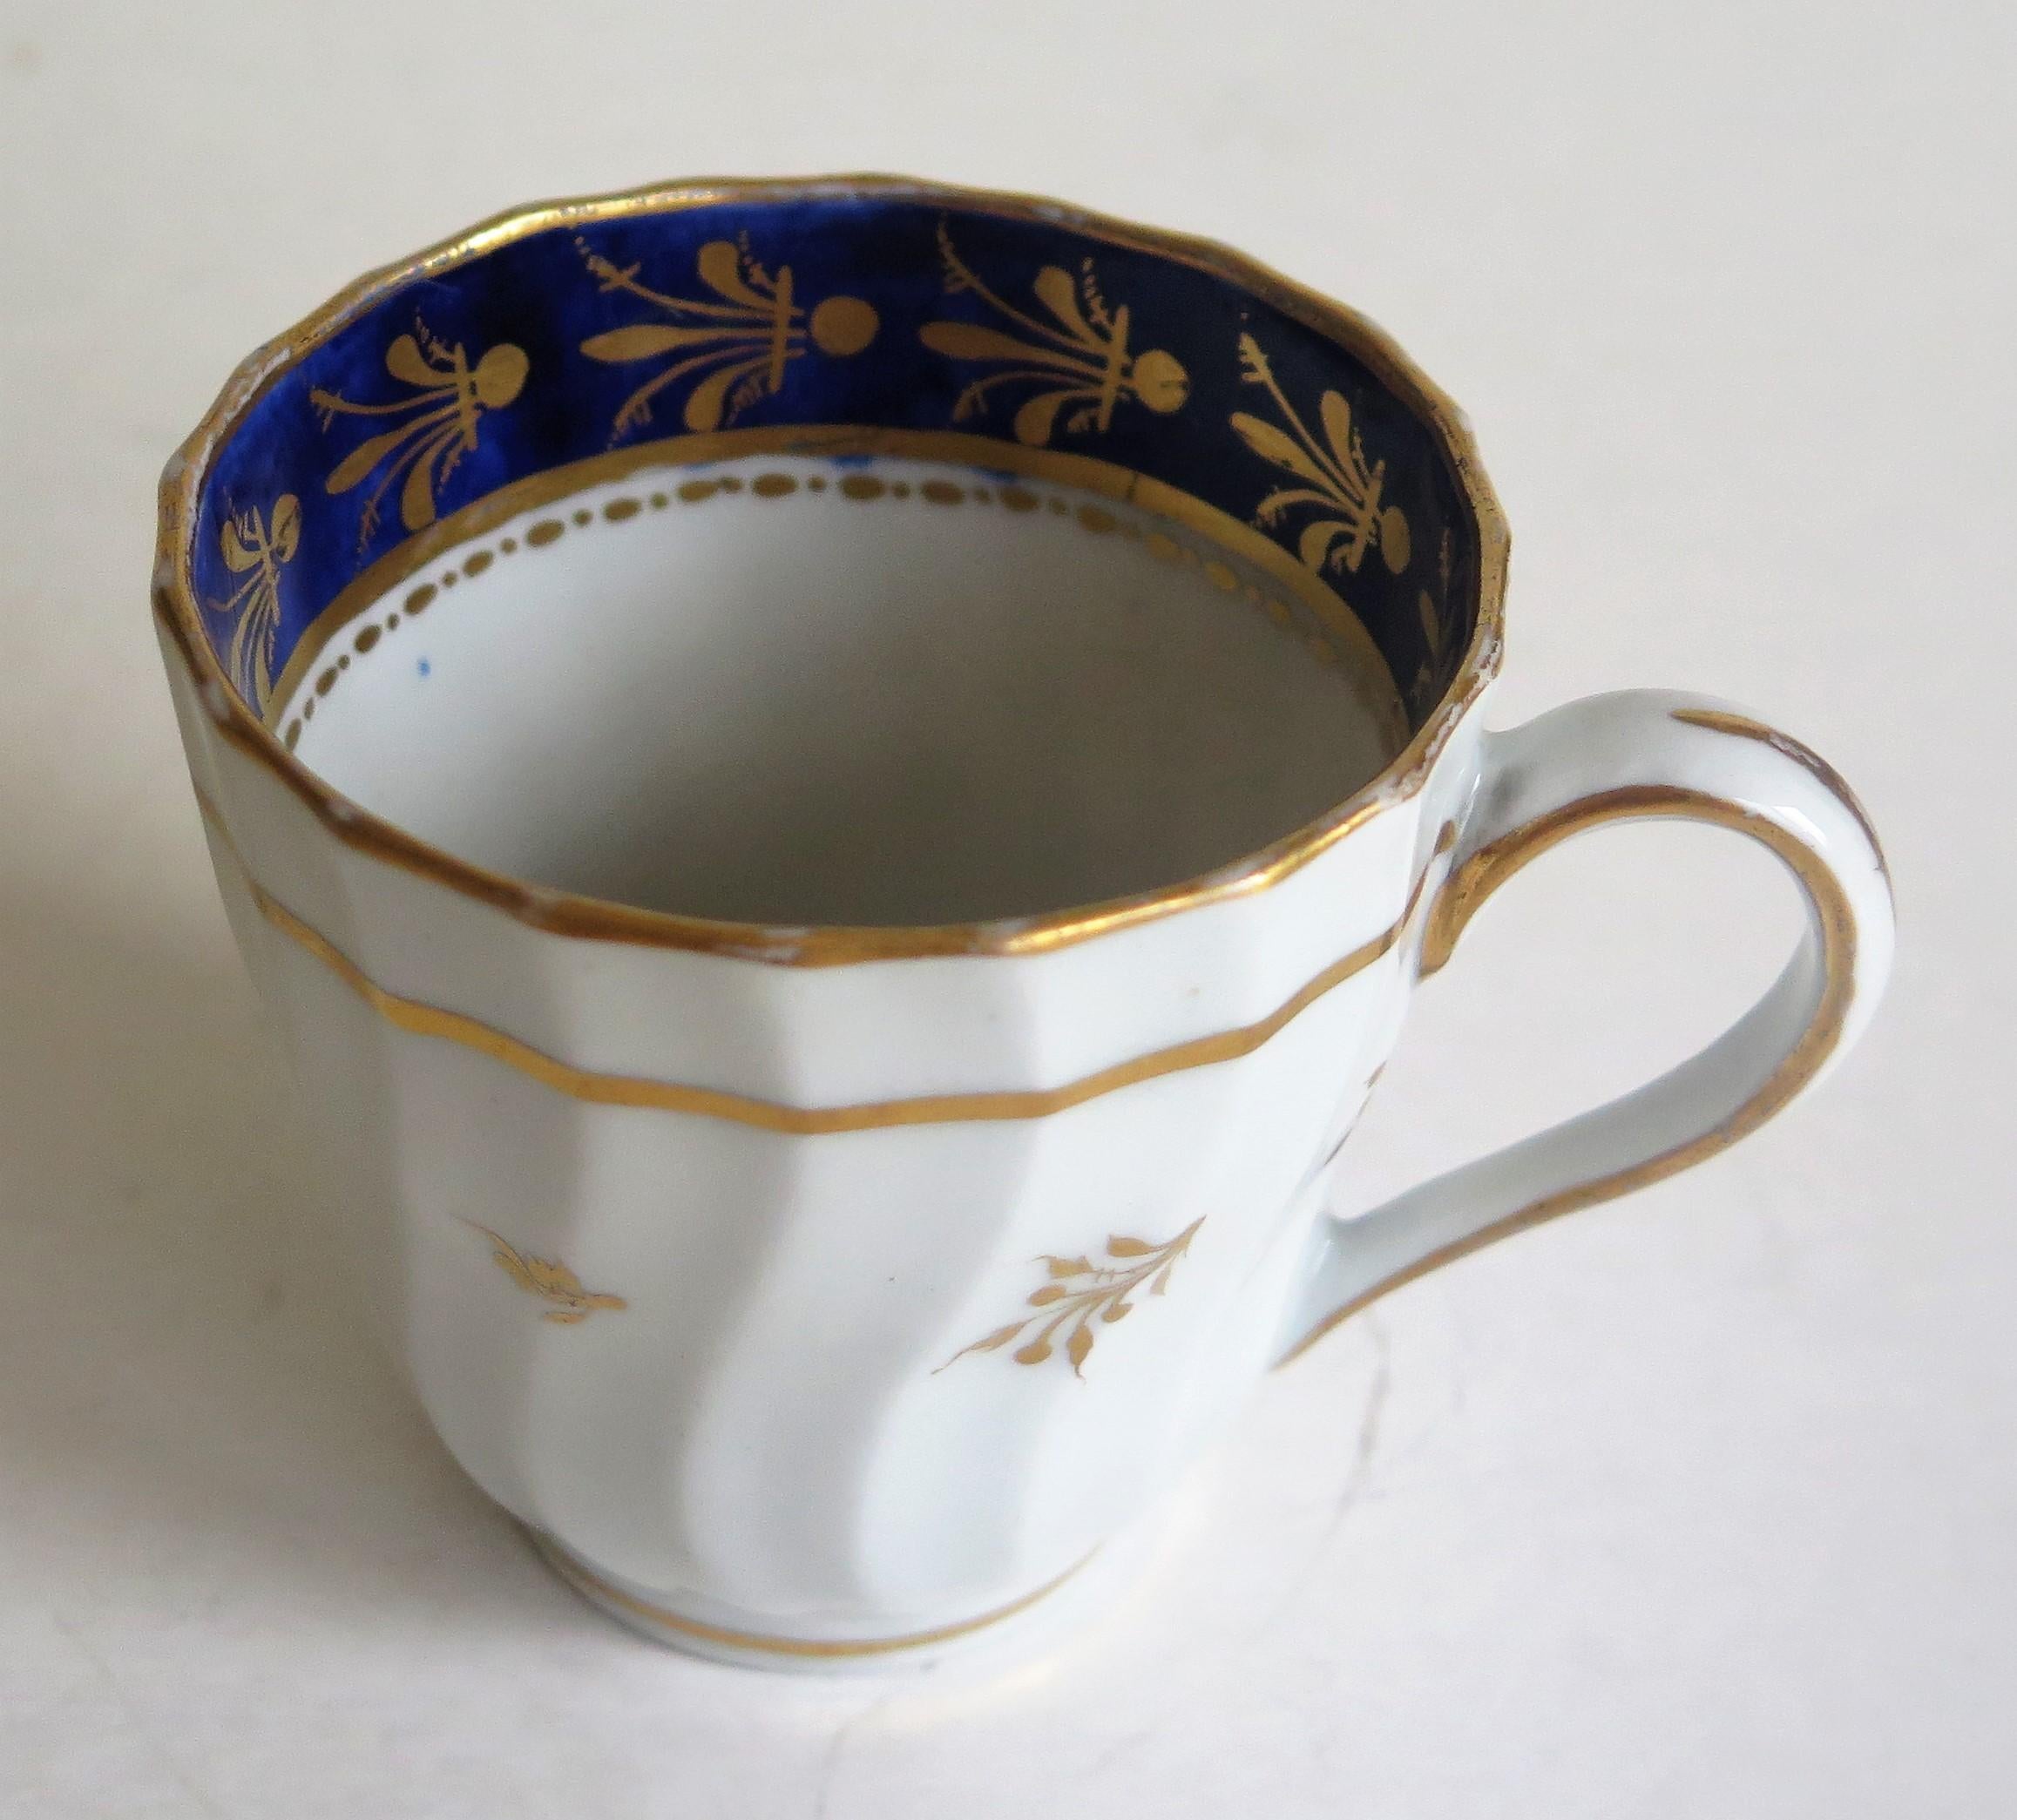 New Hall Porcelain Coffee Cup Shanked and Fluted Body Hand-Painted, circa 1795 7